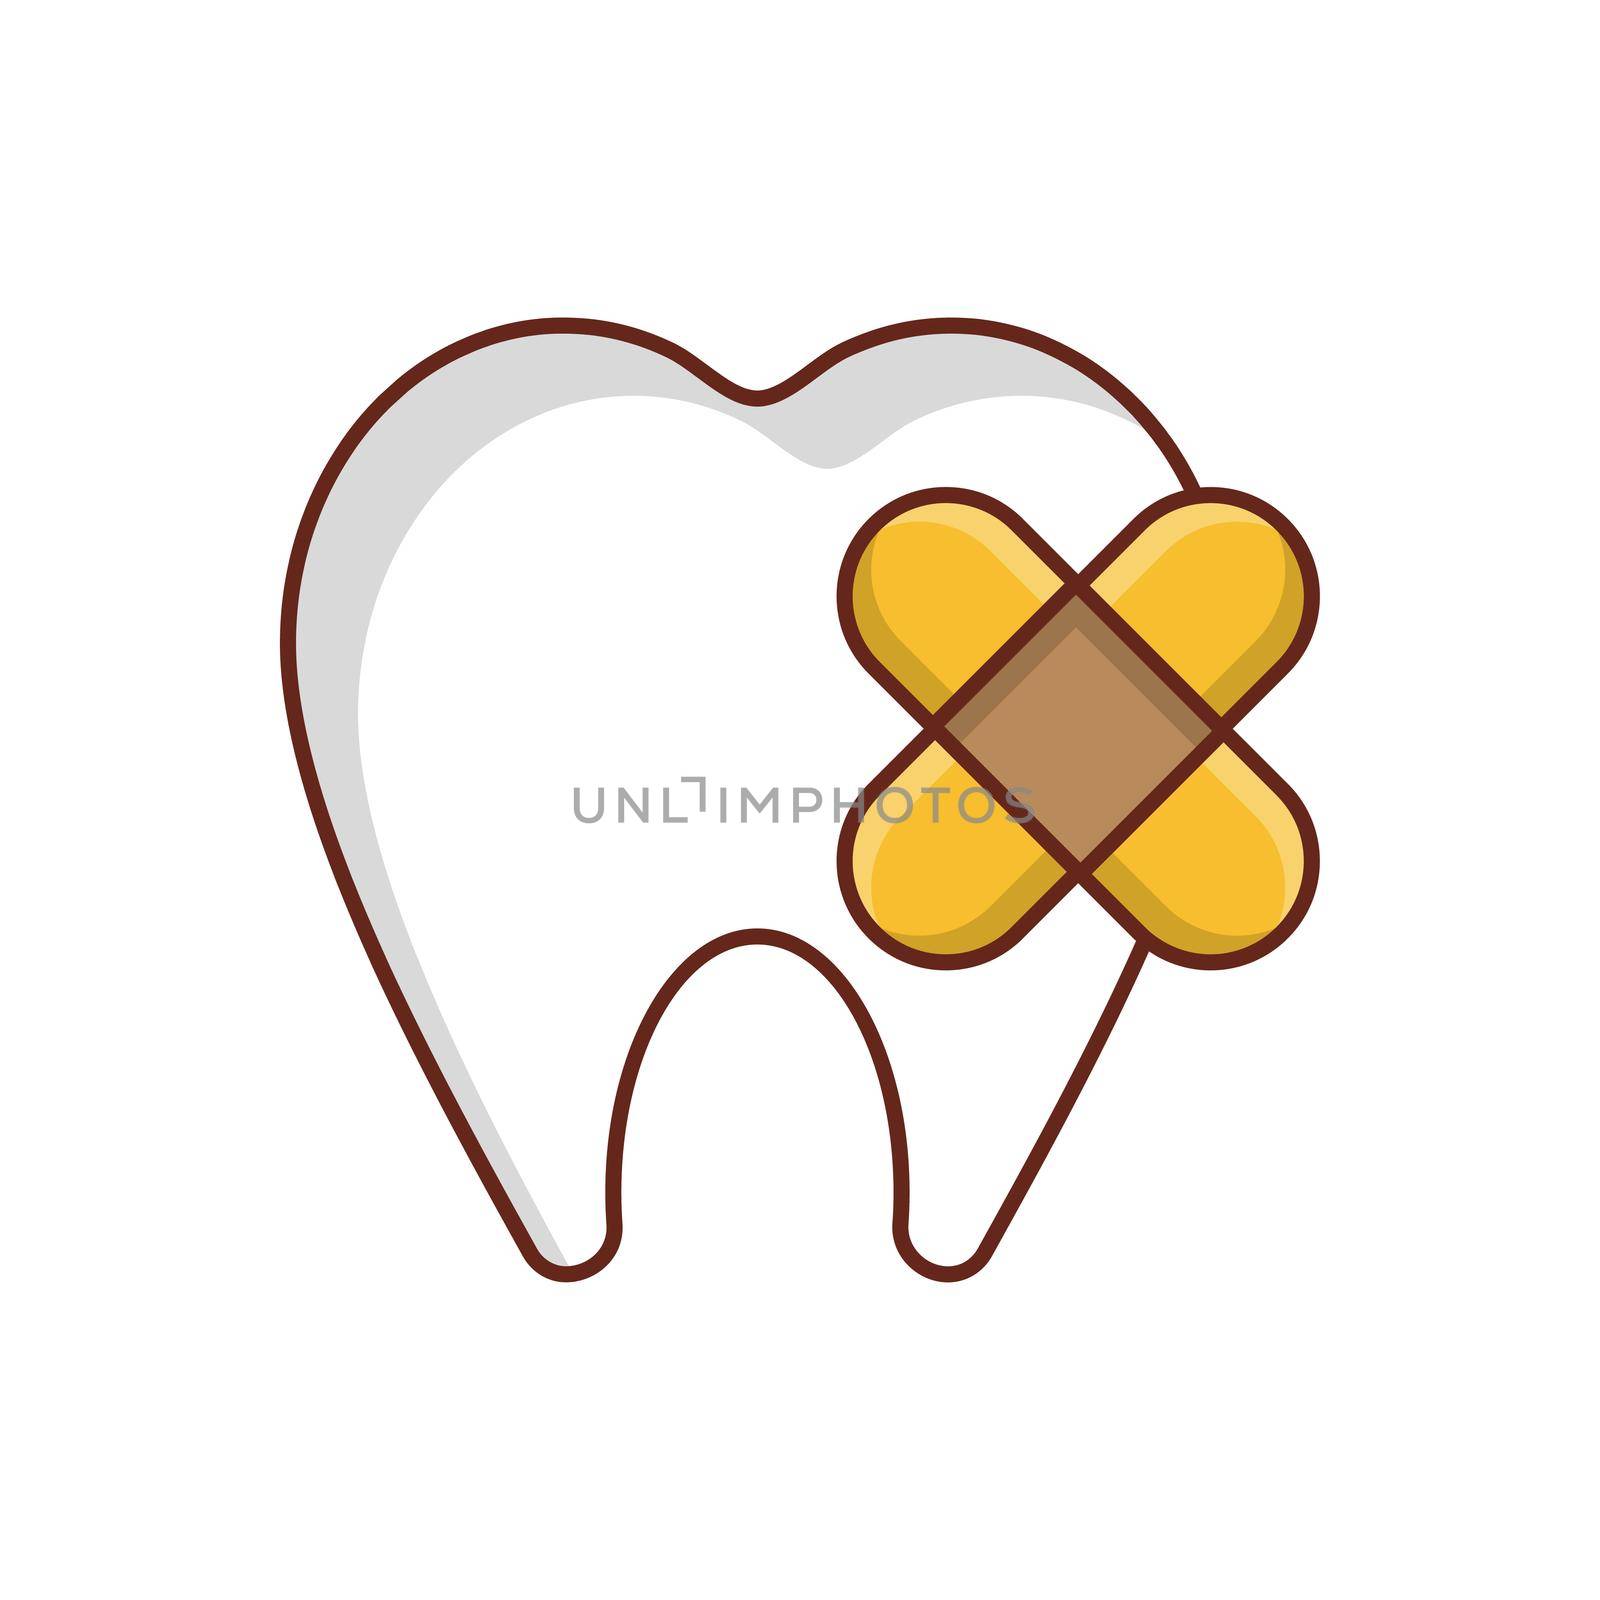 cavity Vector illustration on a transparent background. Premium quality symbols.Vector line flat color icon for concept and graphic design.